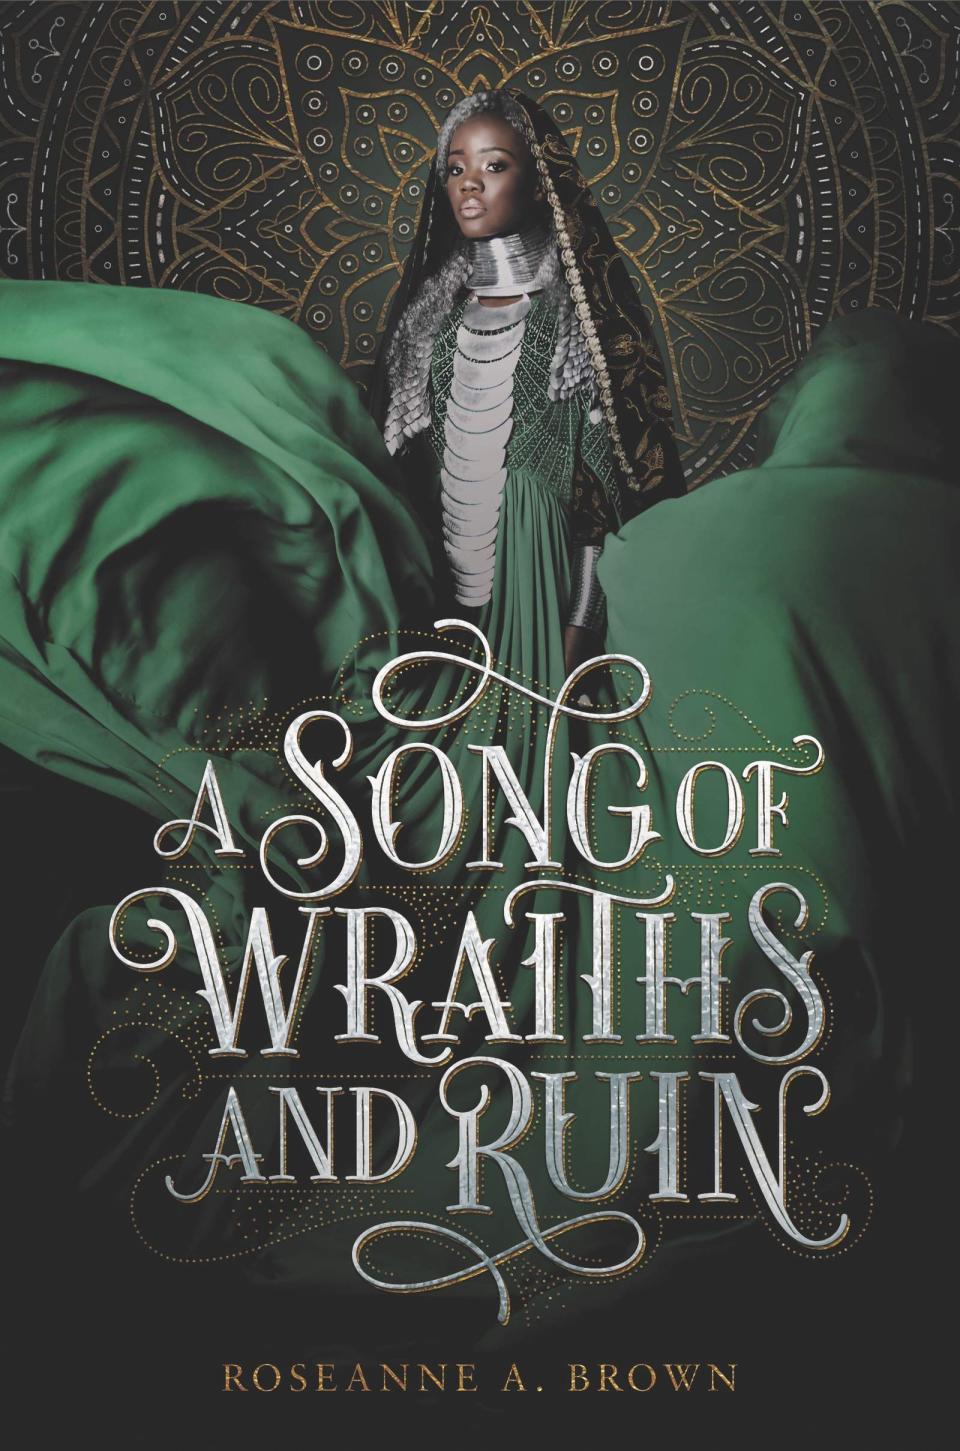 23) ‘A Song of Wraiths and Ruin’ by Roseanne A. Brown